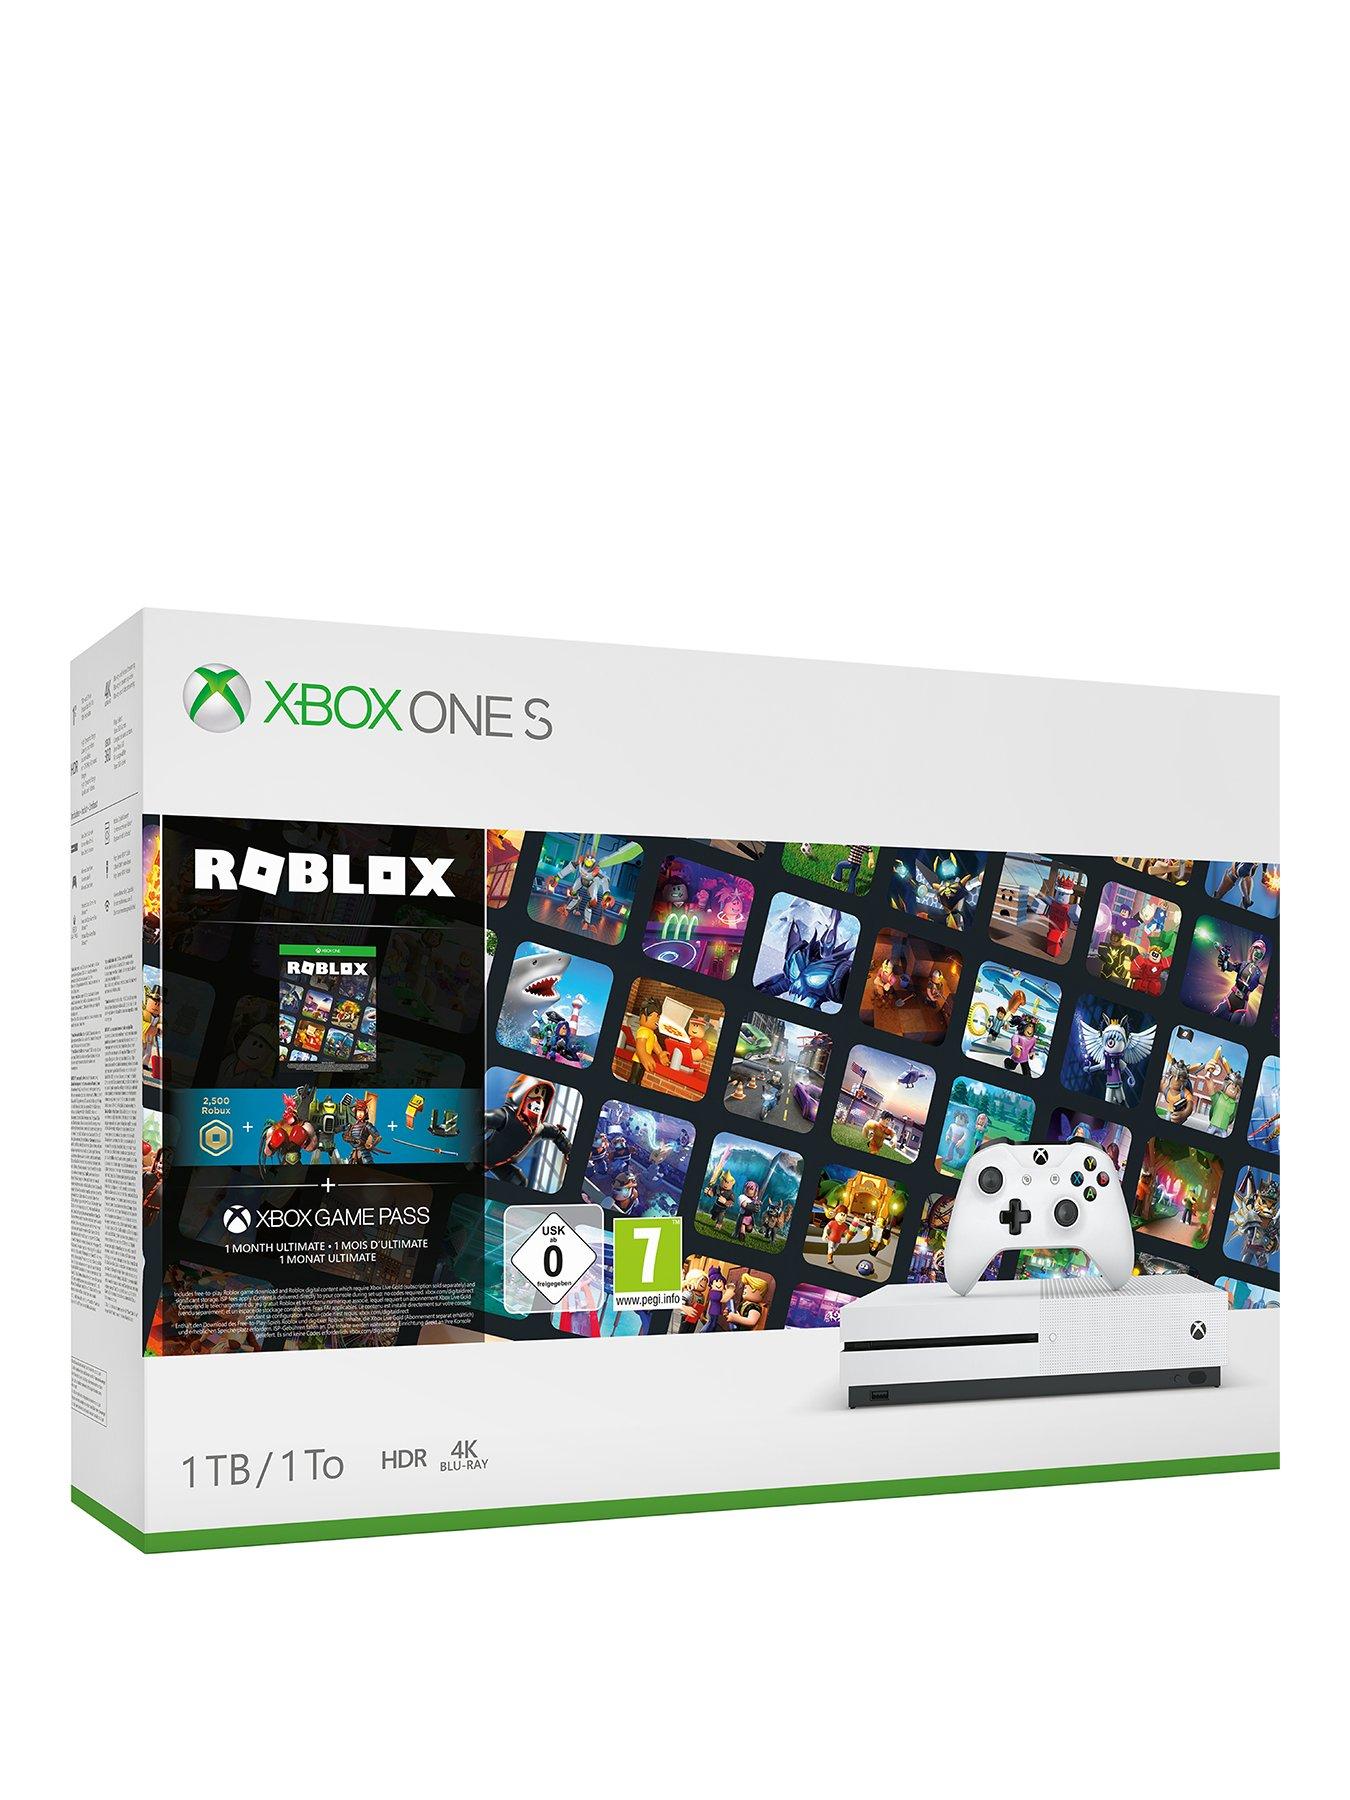 Xbox One S With Roblox Bundle And Optional Extras 1tb Console White Littlewoodsireland Ie - trasspass roblox